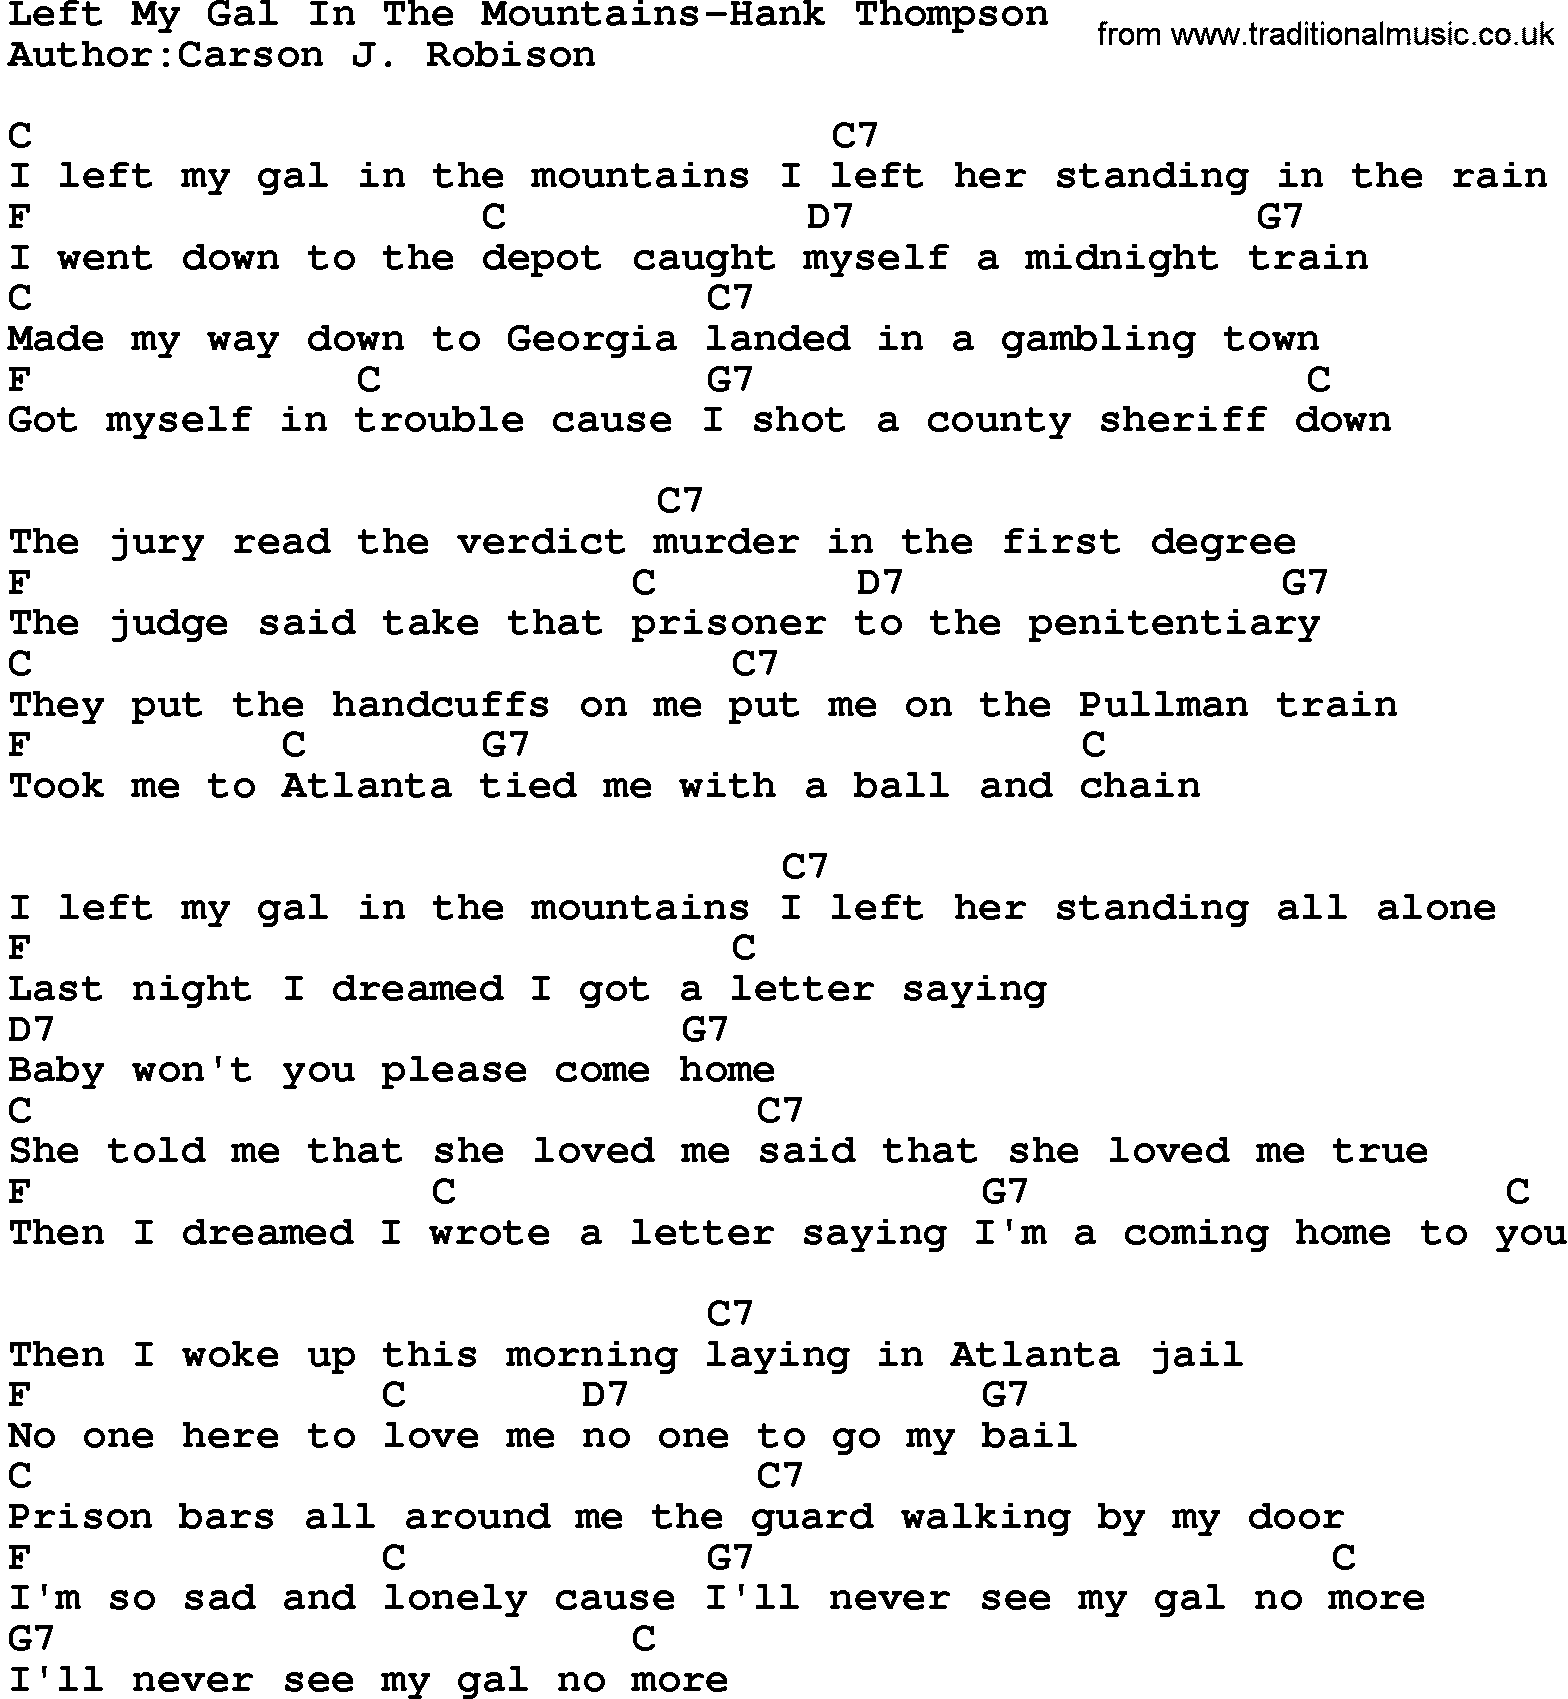 Country music song: Left My Gal In The Mountains-Hank Thompson lyrics and chords